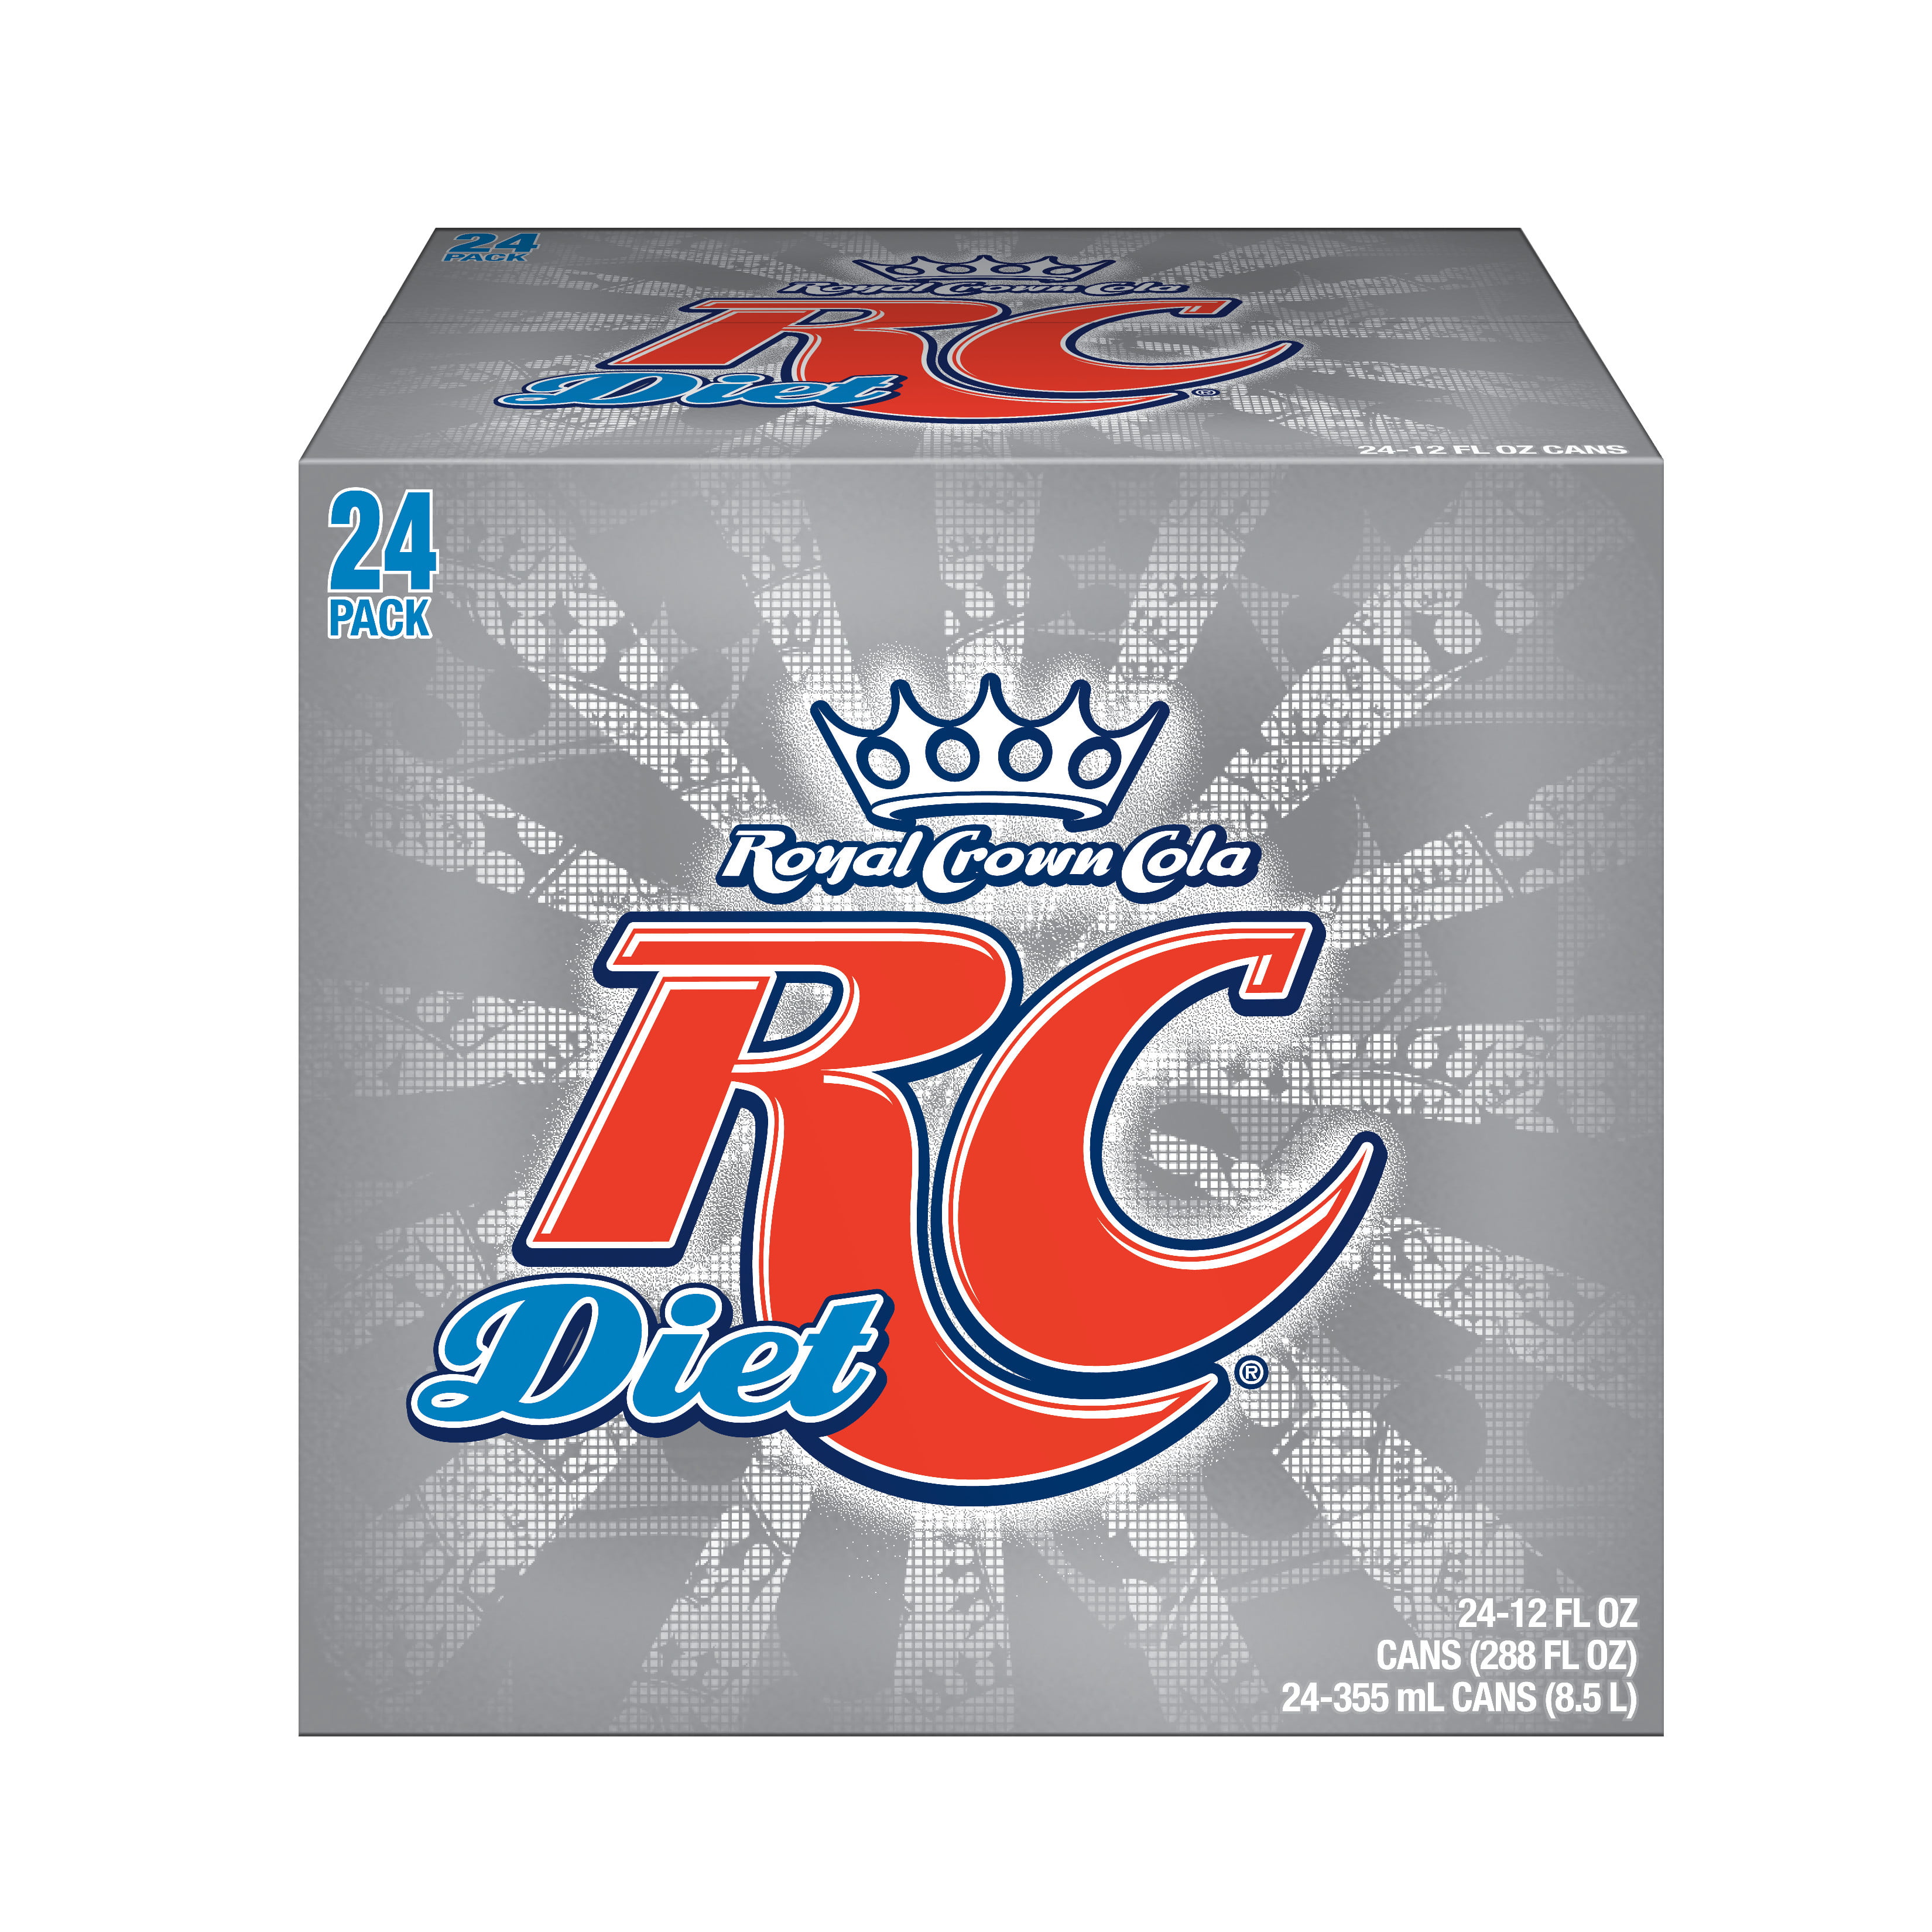 where to buy diet rc cola